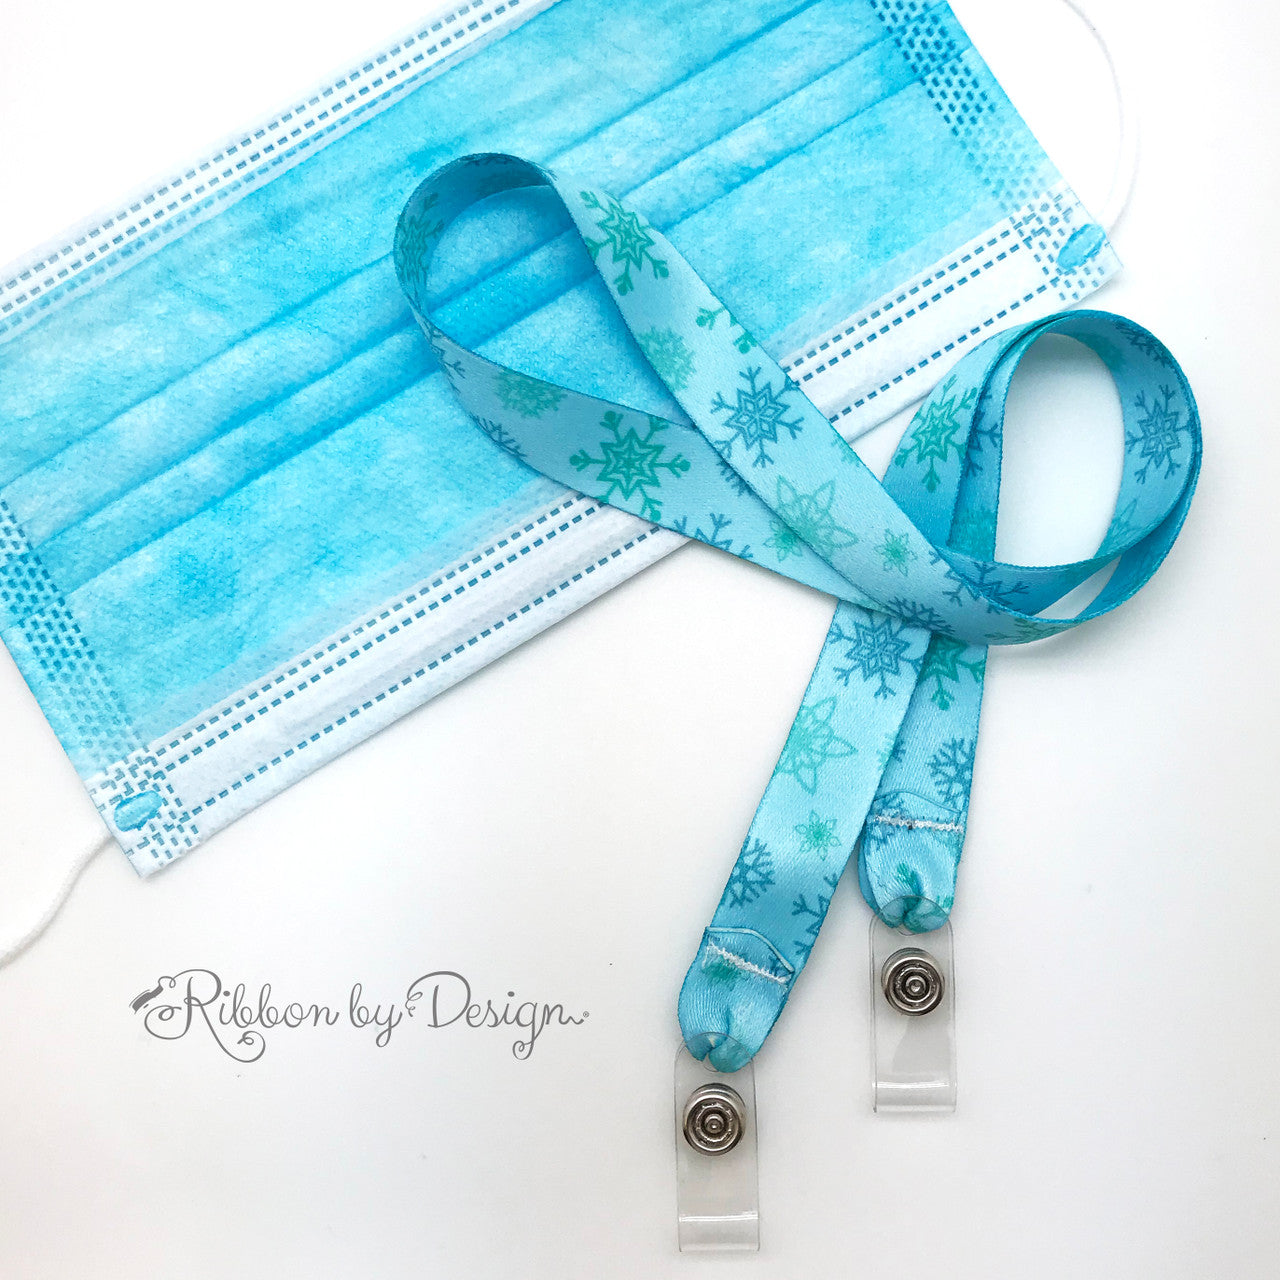 Attach our Frozen blue snowflake design mask holder by  opening the snaps and securing the loops of the mask to the lanyard! Never have a lost face mask on the playground, in school, at sports practice or in dance class again!